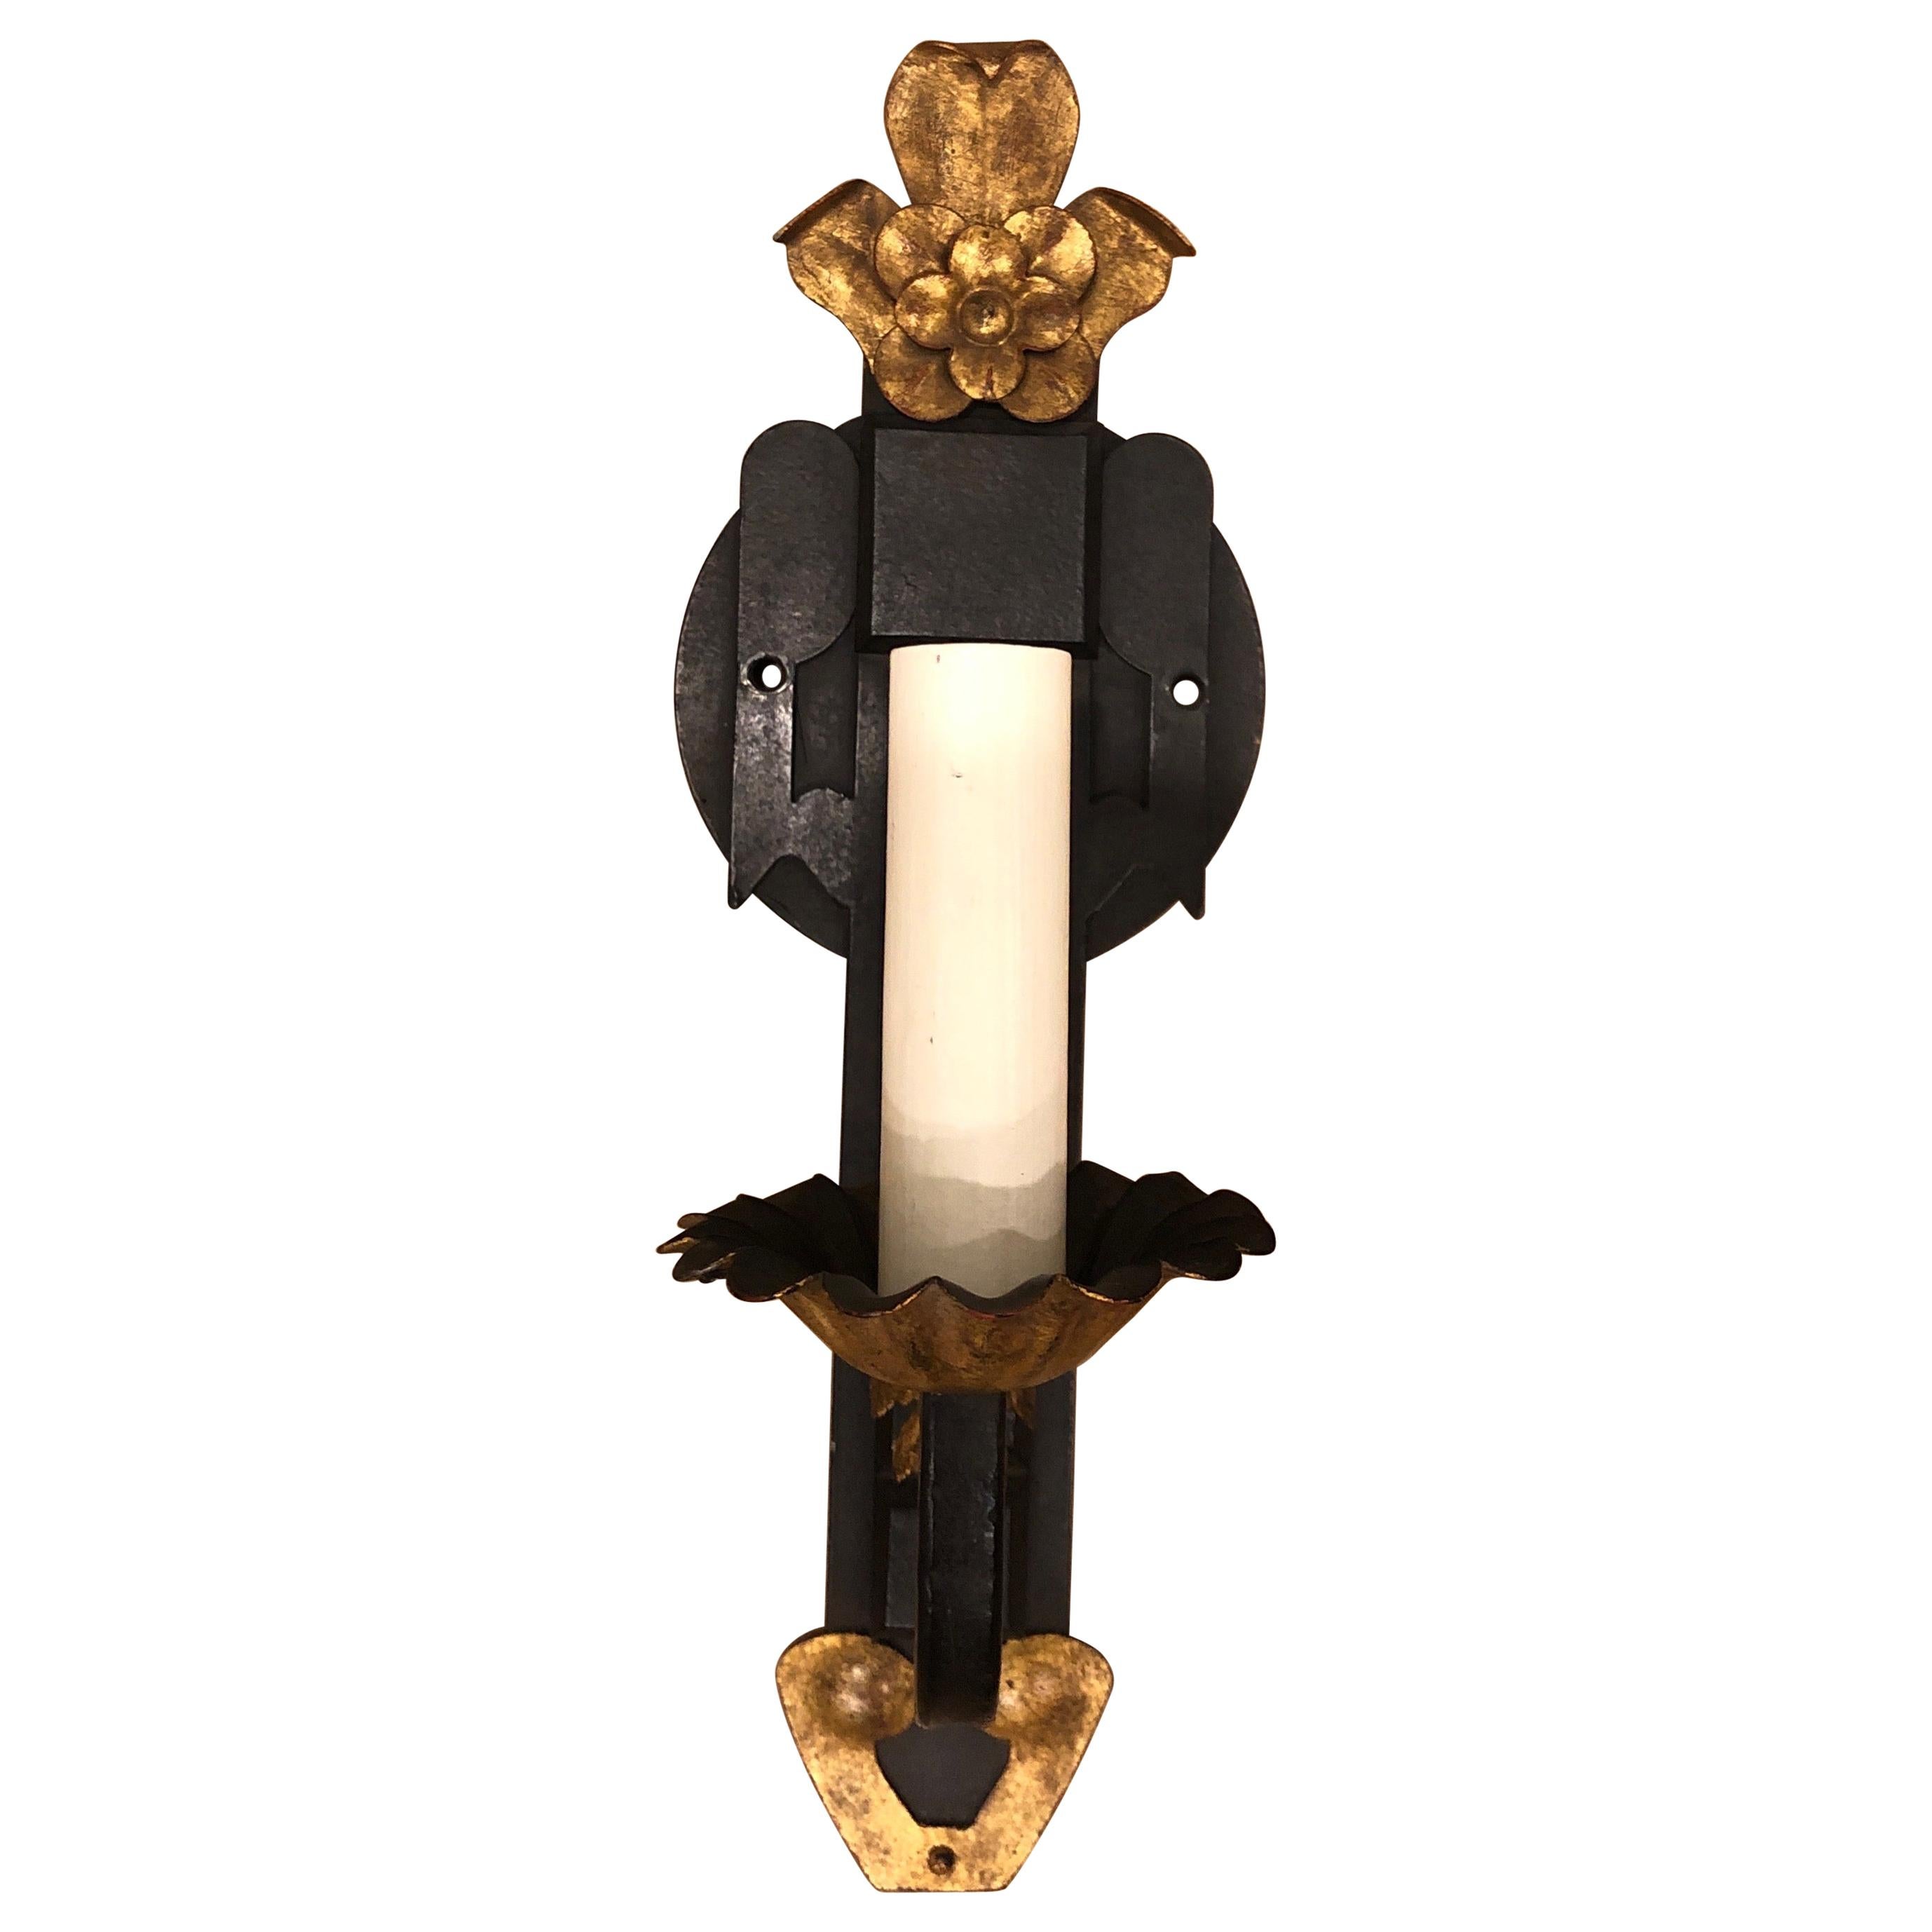 Paul Ferrante Single Wall Sconce, Gilt Gold and Bronze